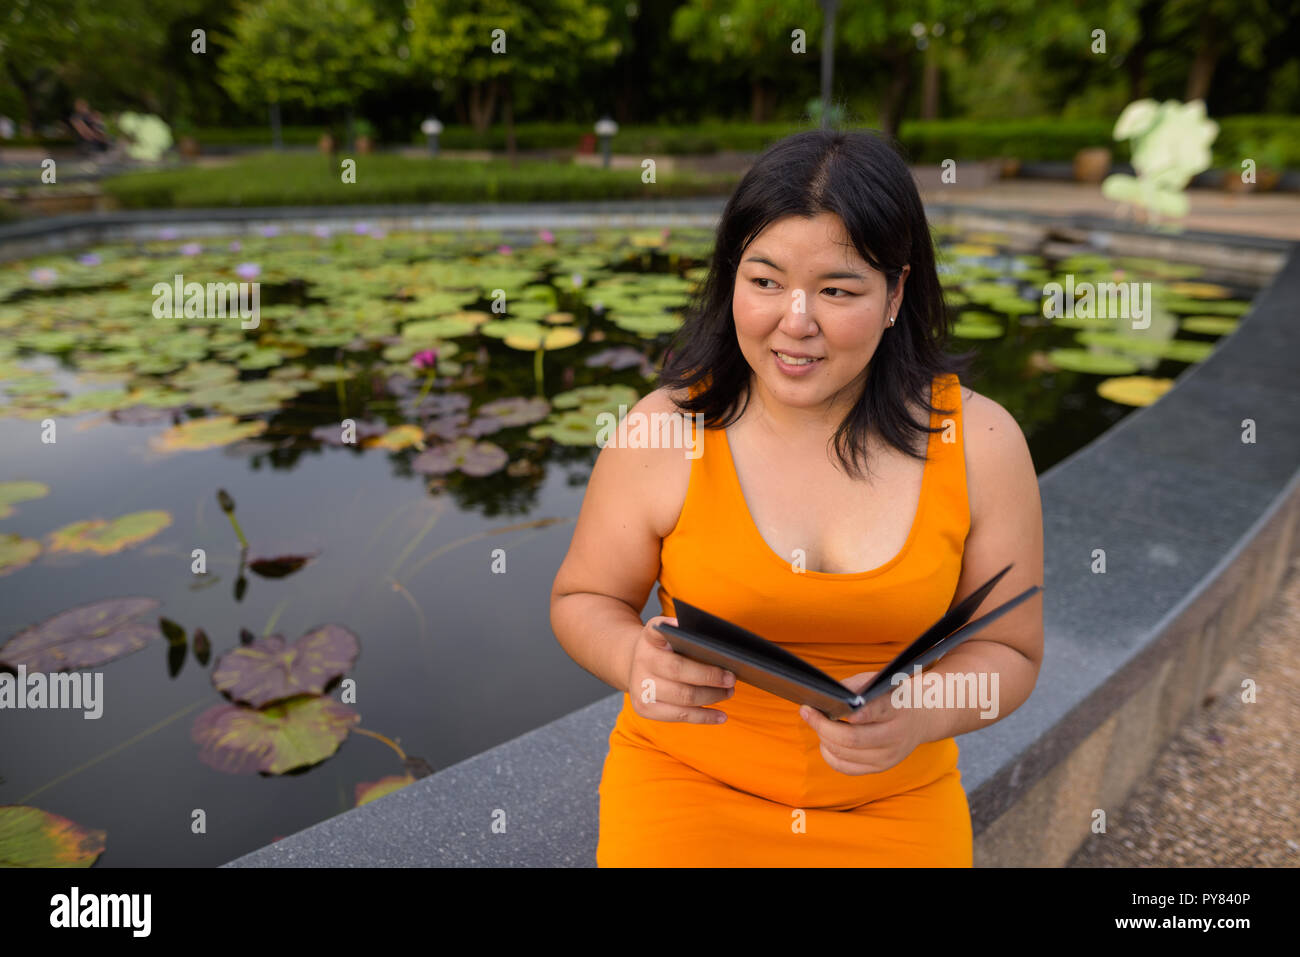 Beautiful overweight Asian woman smiling and reading book in park Stock Photo